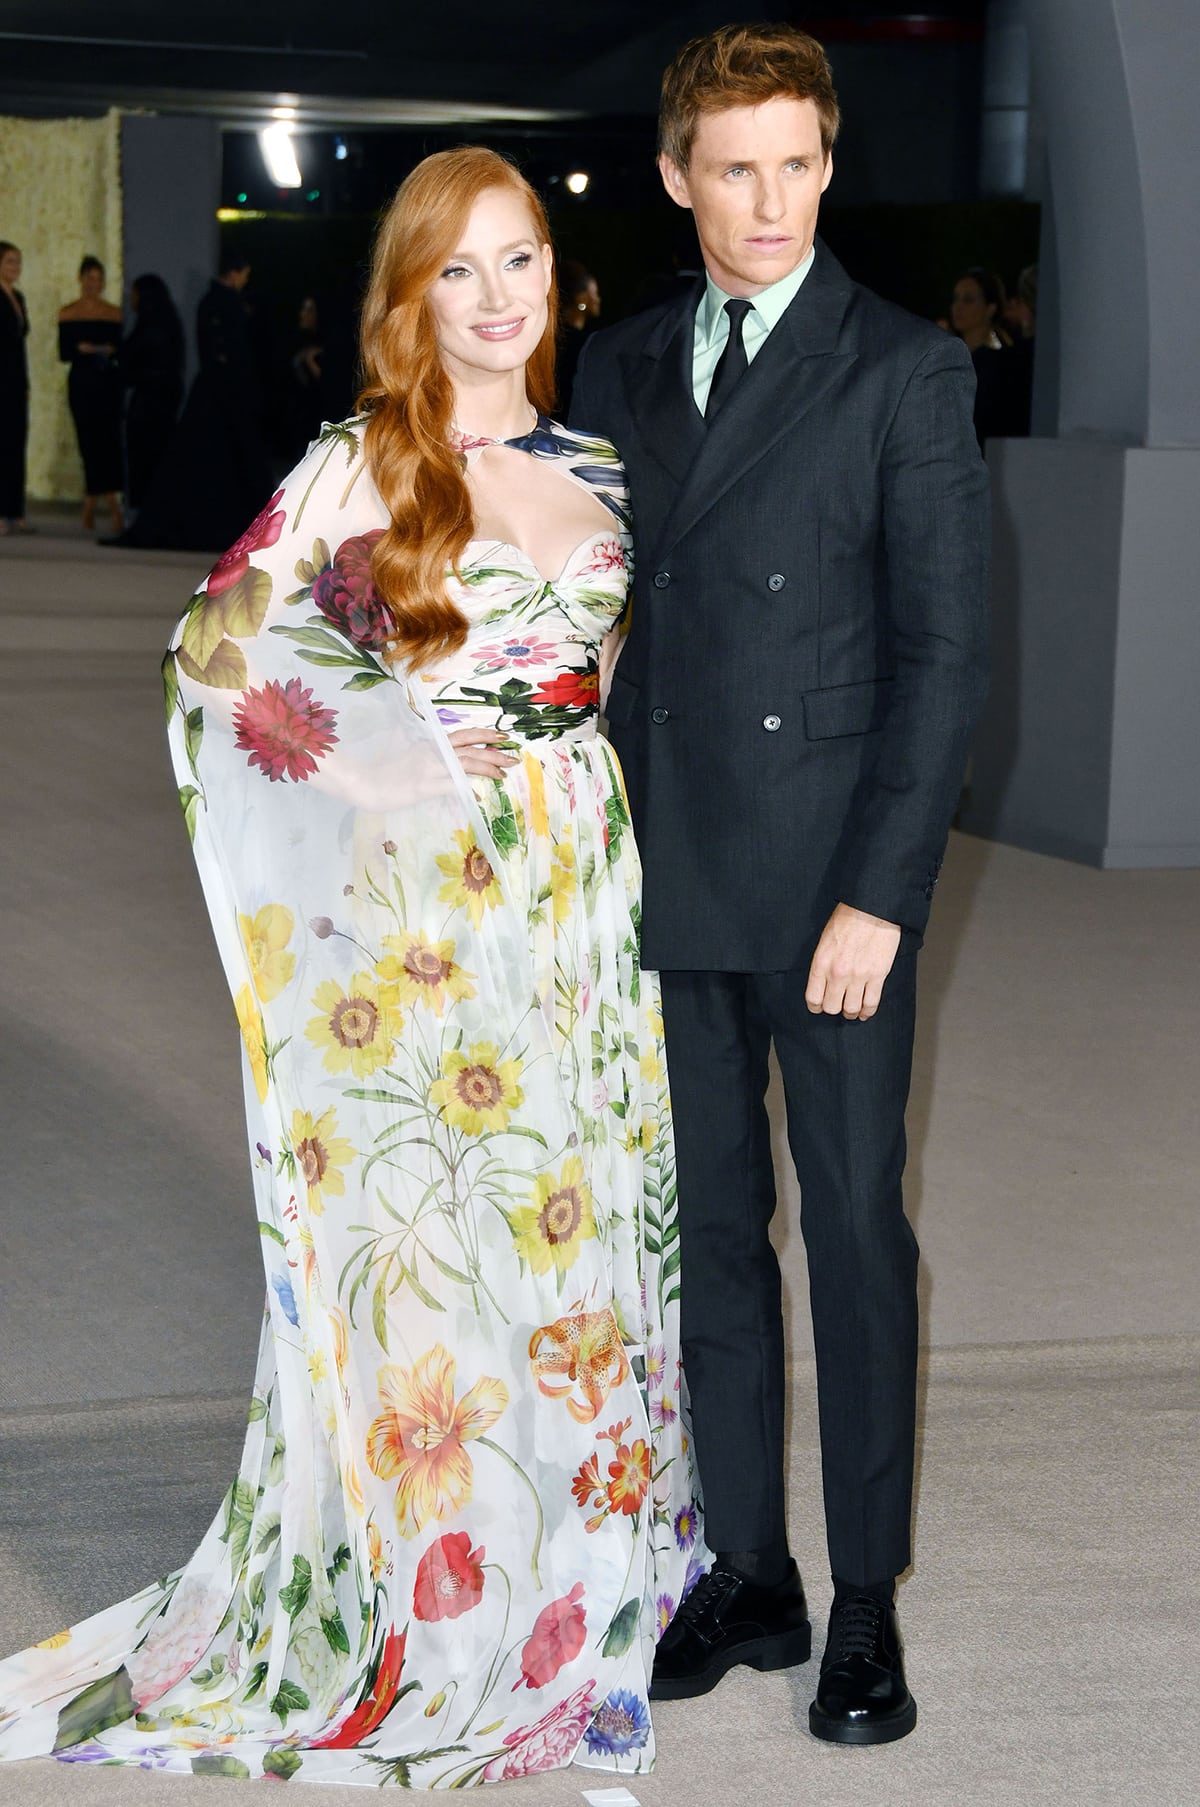 Jessica Chastain and Eddie Redmayne at the 2nd Annual Academy Museum Gala on October 15, 2022